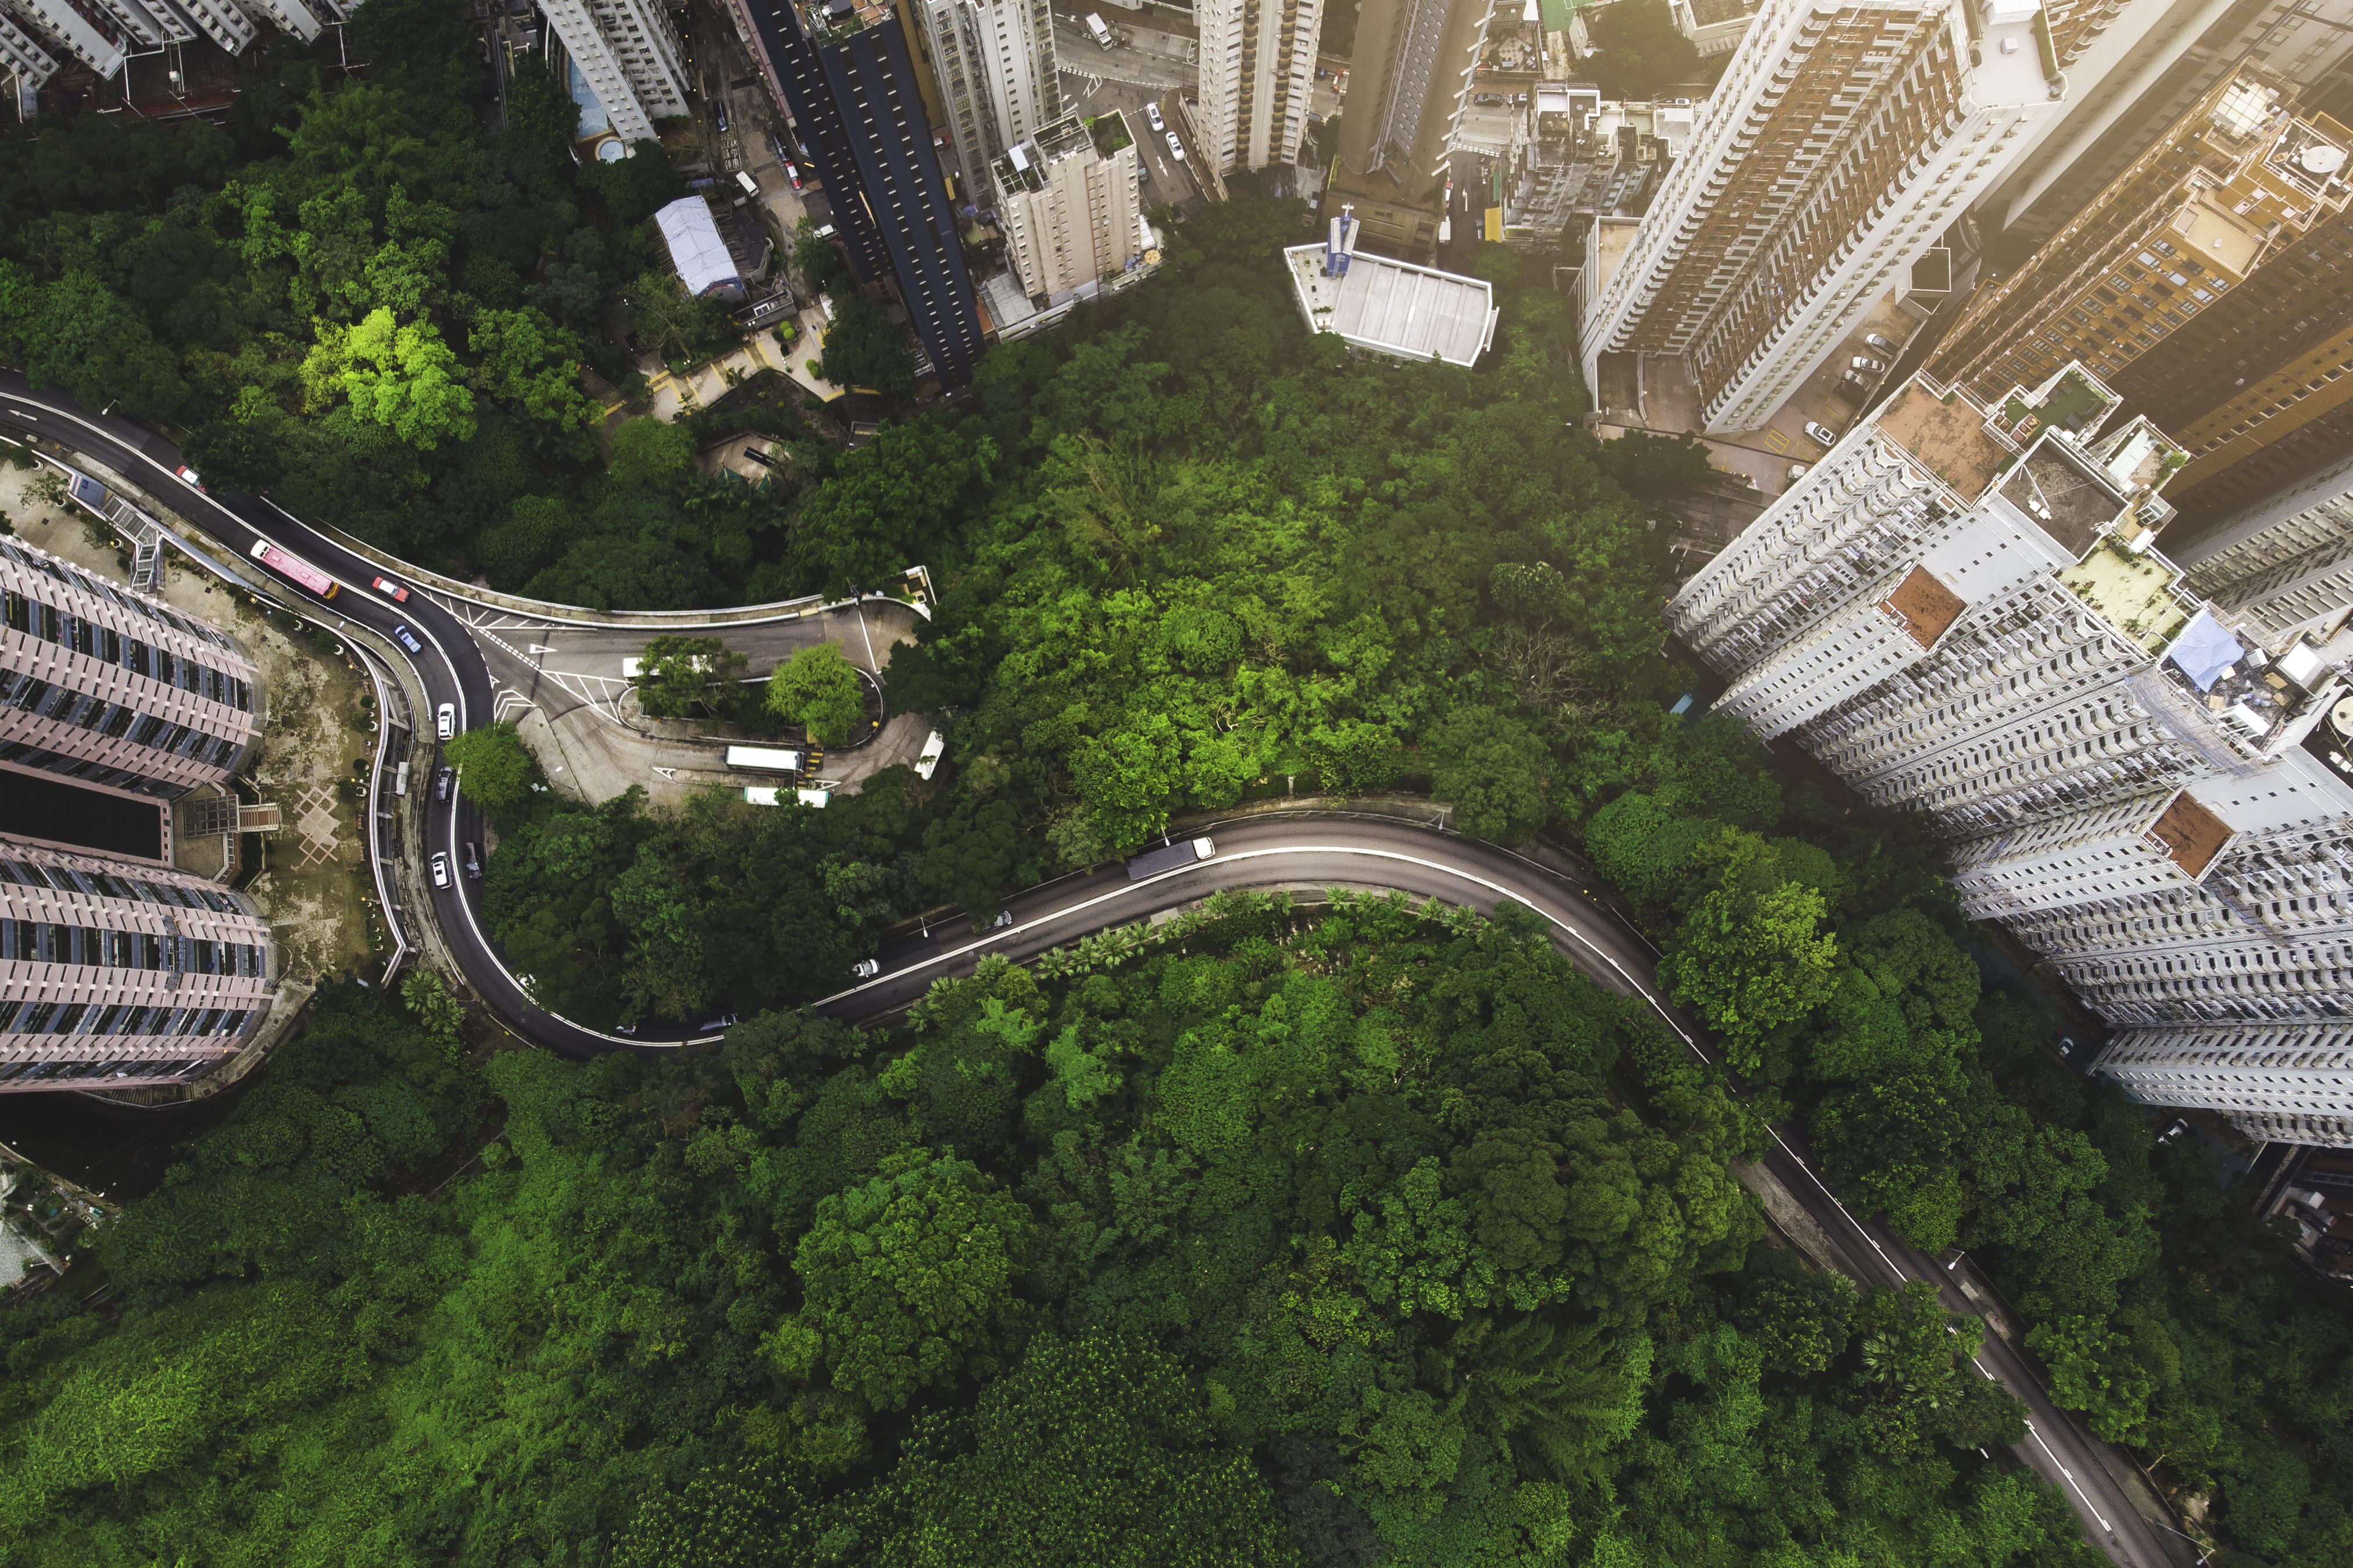 A photo of a modern city next to a lush forest				